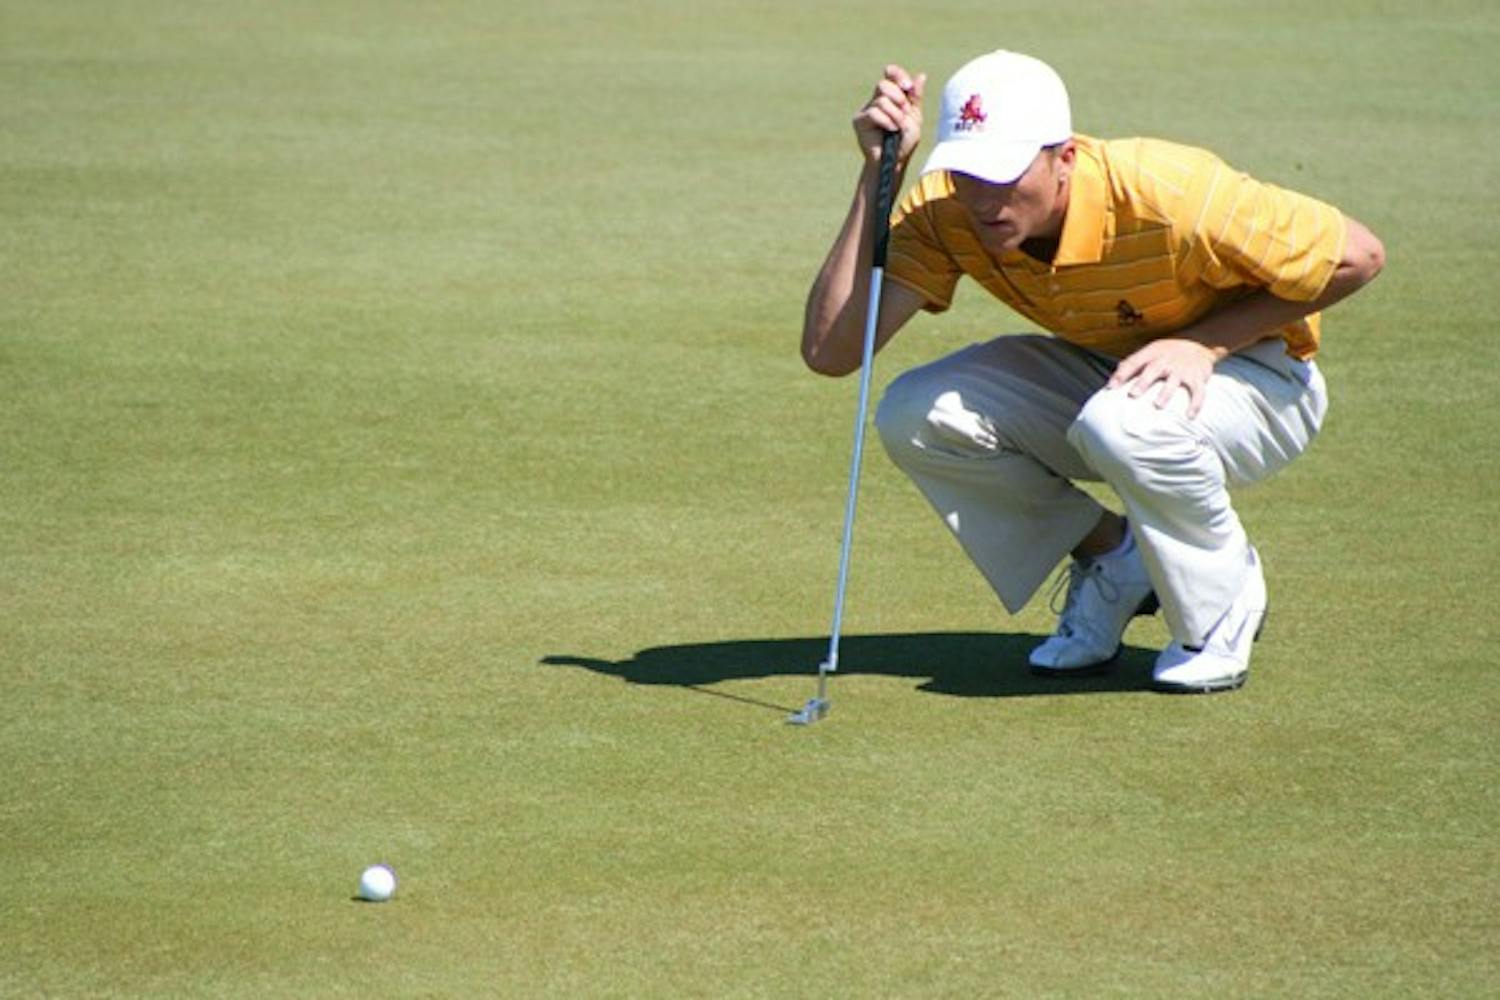 Change of Season: ASU senior Scott Pinckney lines up a putt during the ASU Thunderbird Invitational on April 10. Pinckney finished tied for 15th at the Western Intercollegiate on Sunday in what was the team’s final regular season competition. (Photo by Lisa Bartoli)